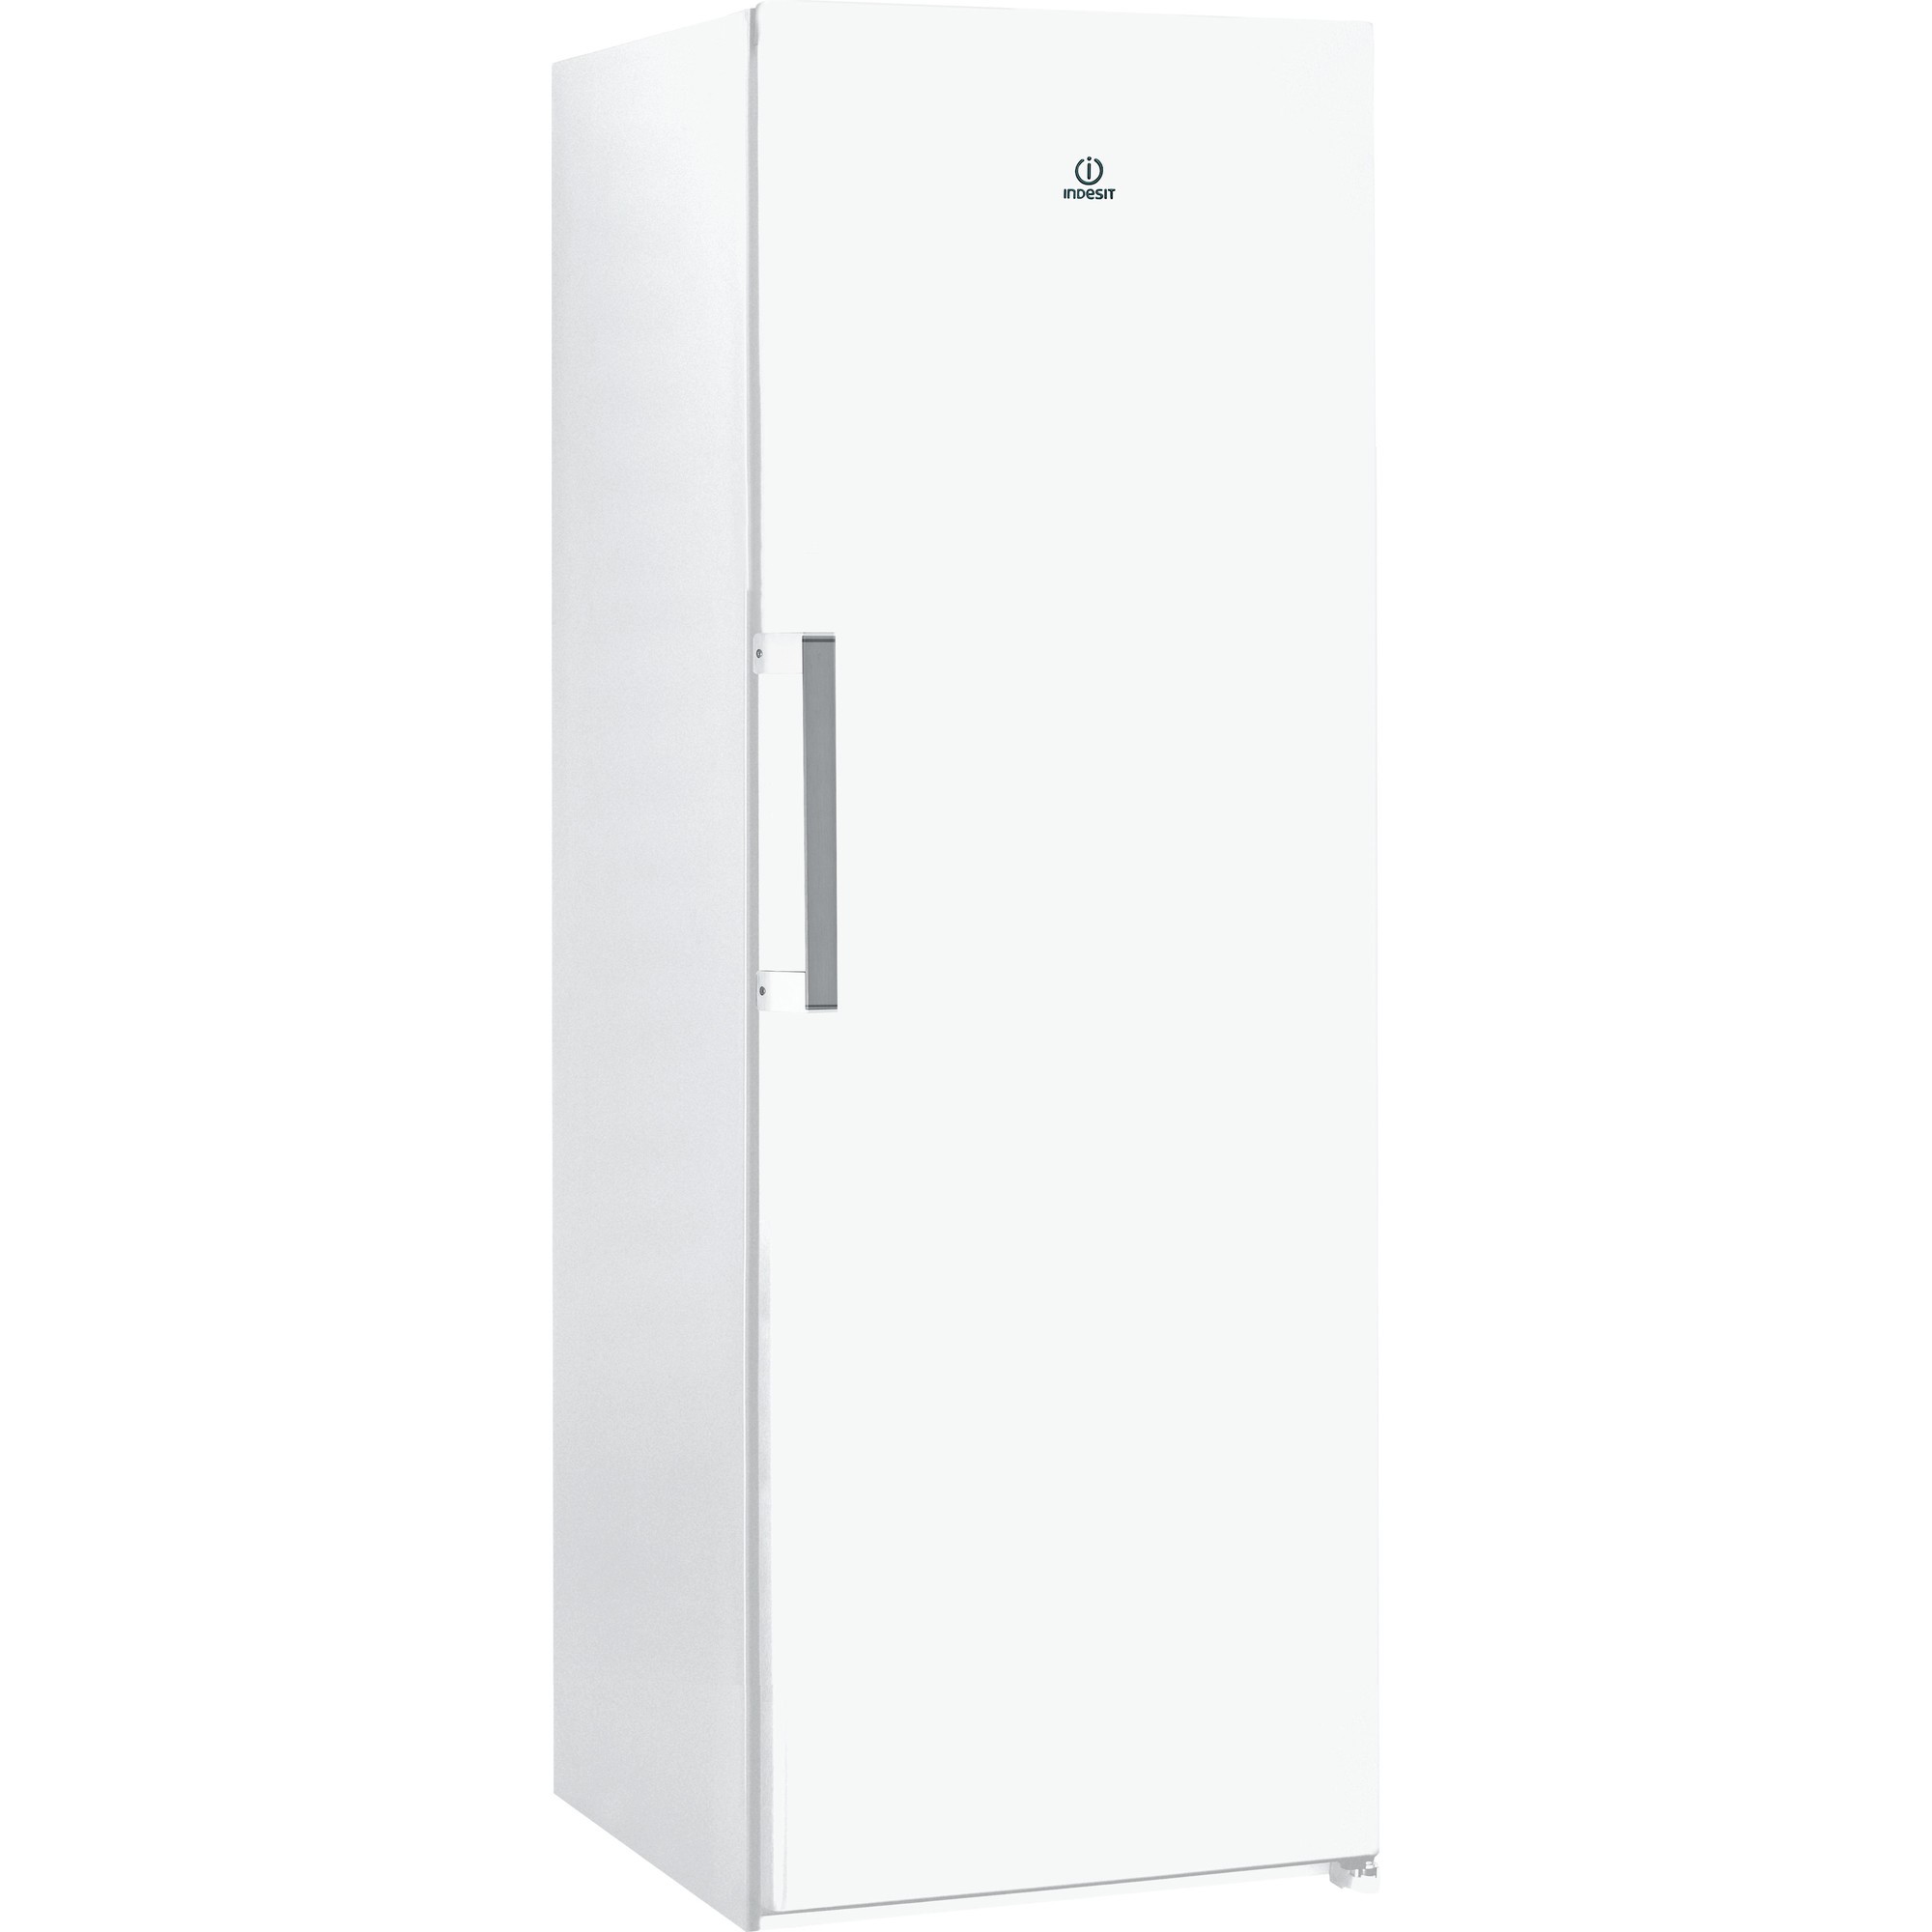 Photos - Other for Computer Indesit 323 Litre Freestanding Fridge - White 869991673170 